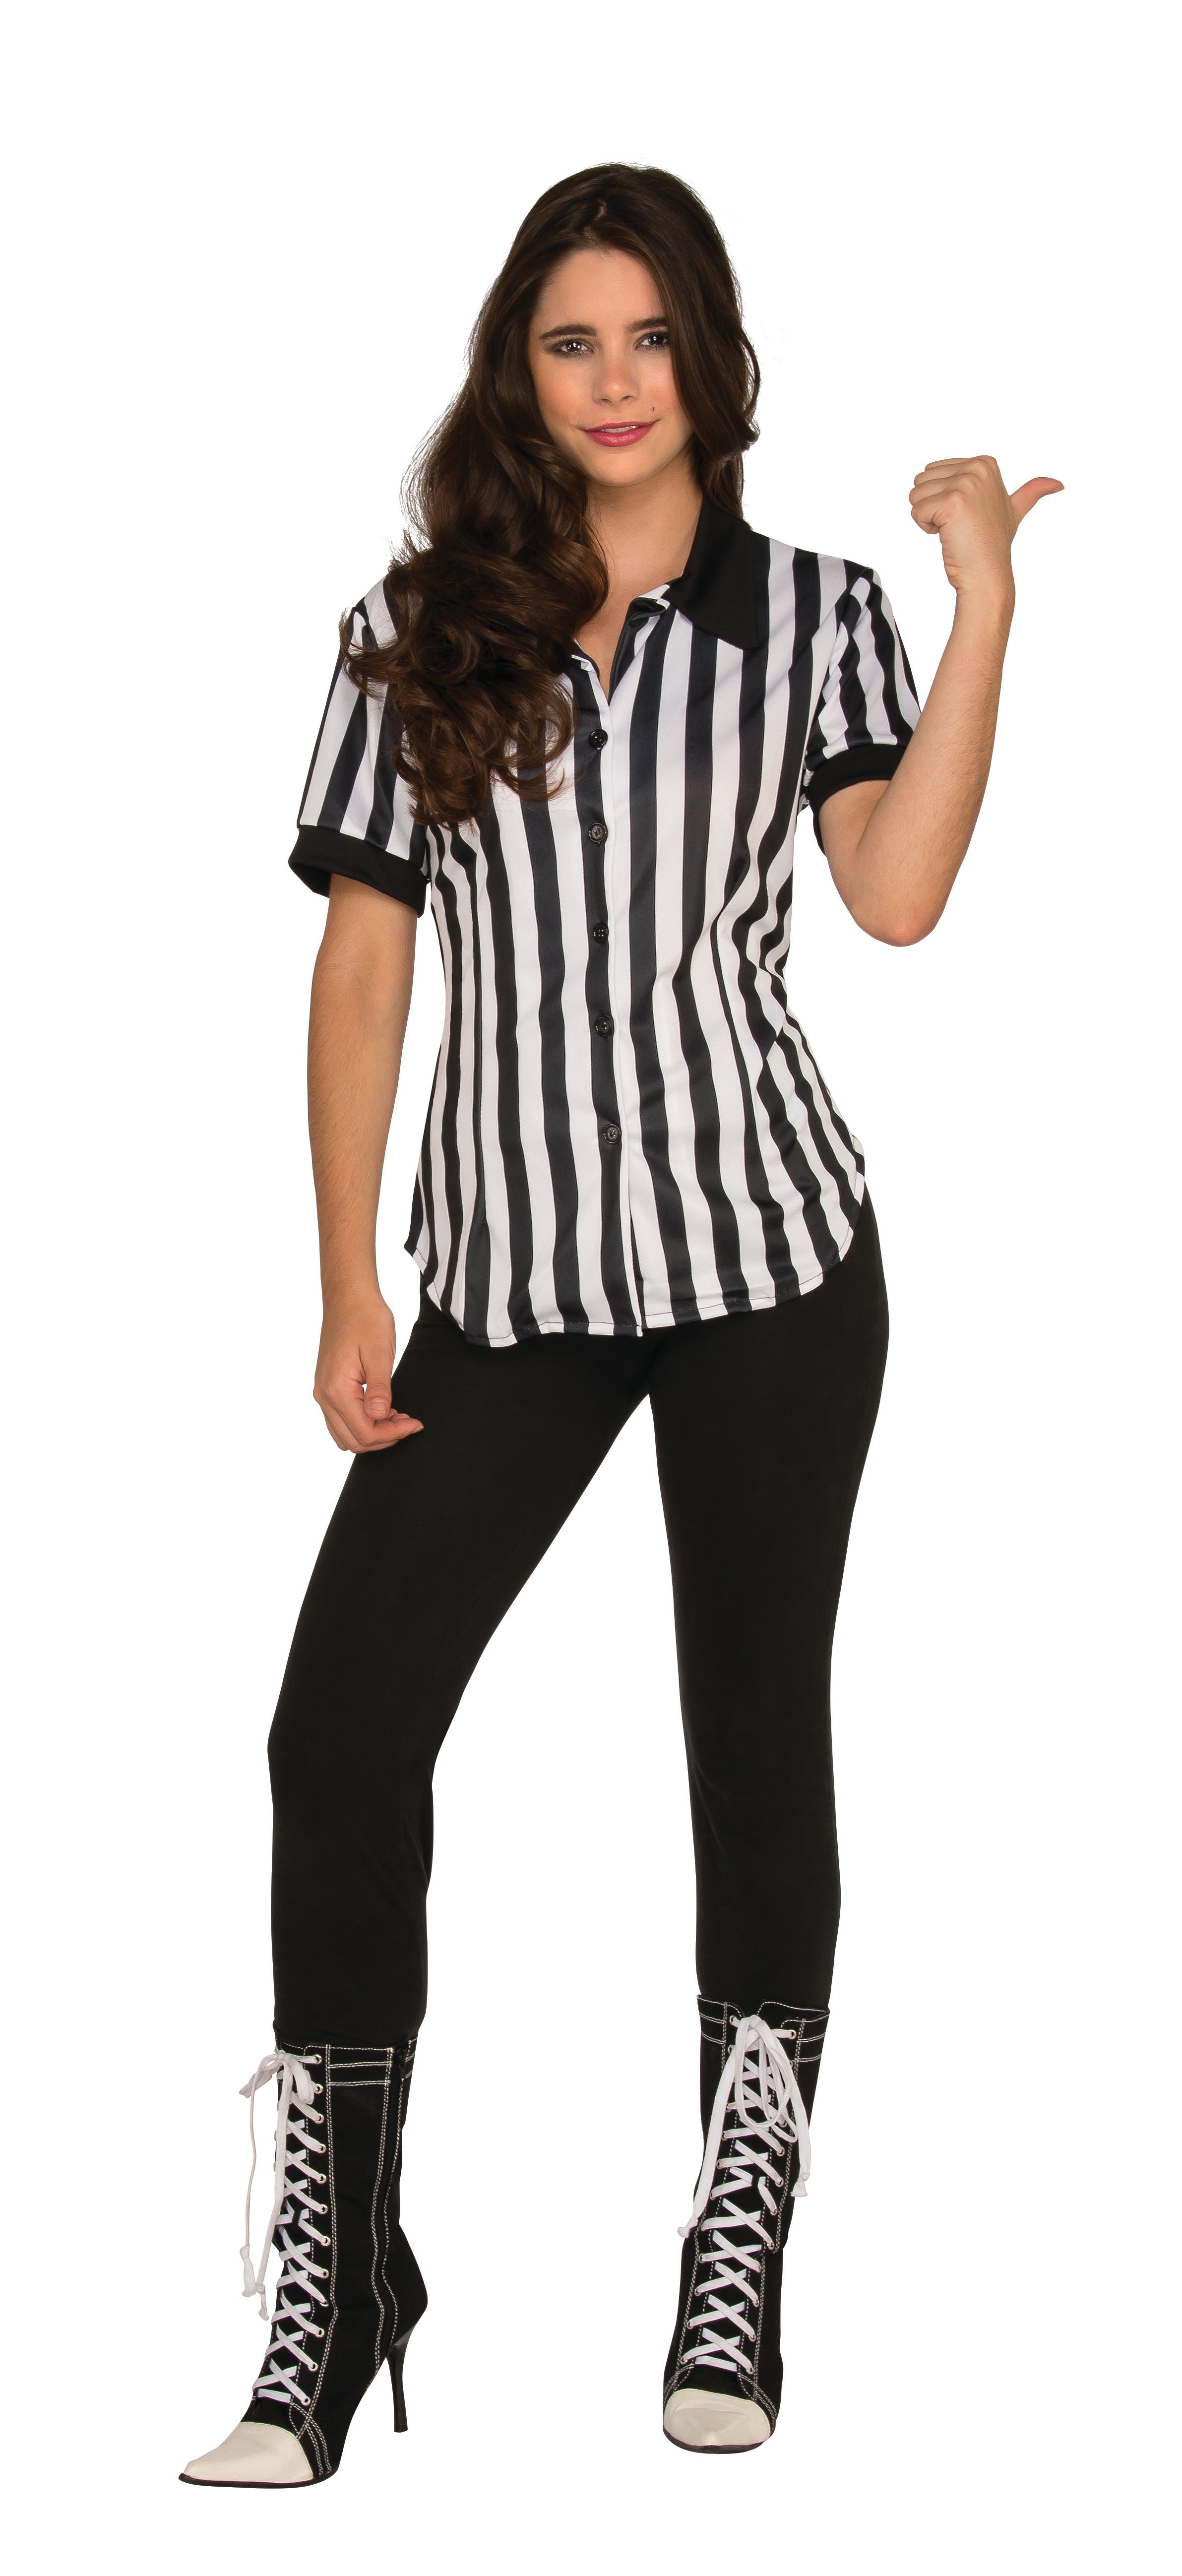 Referee Store | Elite Soccer Referee Jersey (Short or Long Sleeve) Black & White Adult 4X-Large +